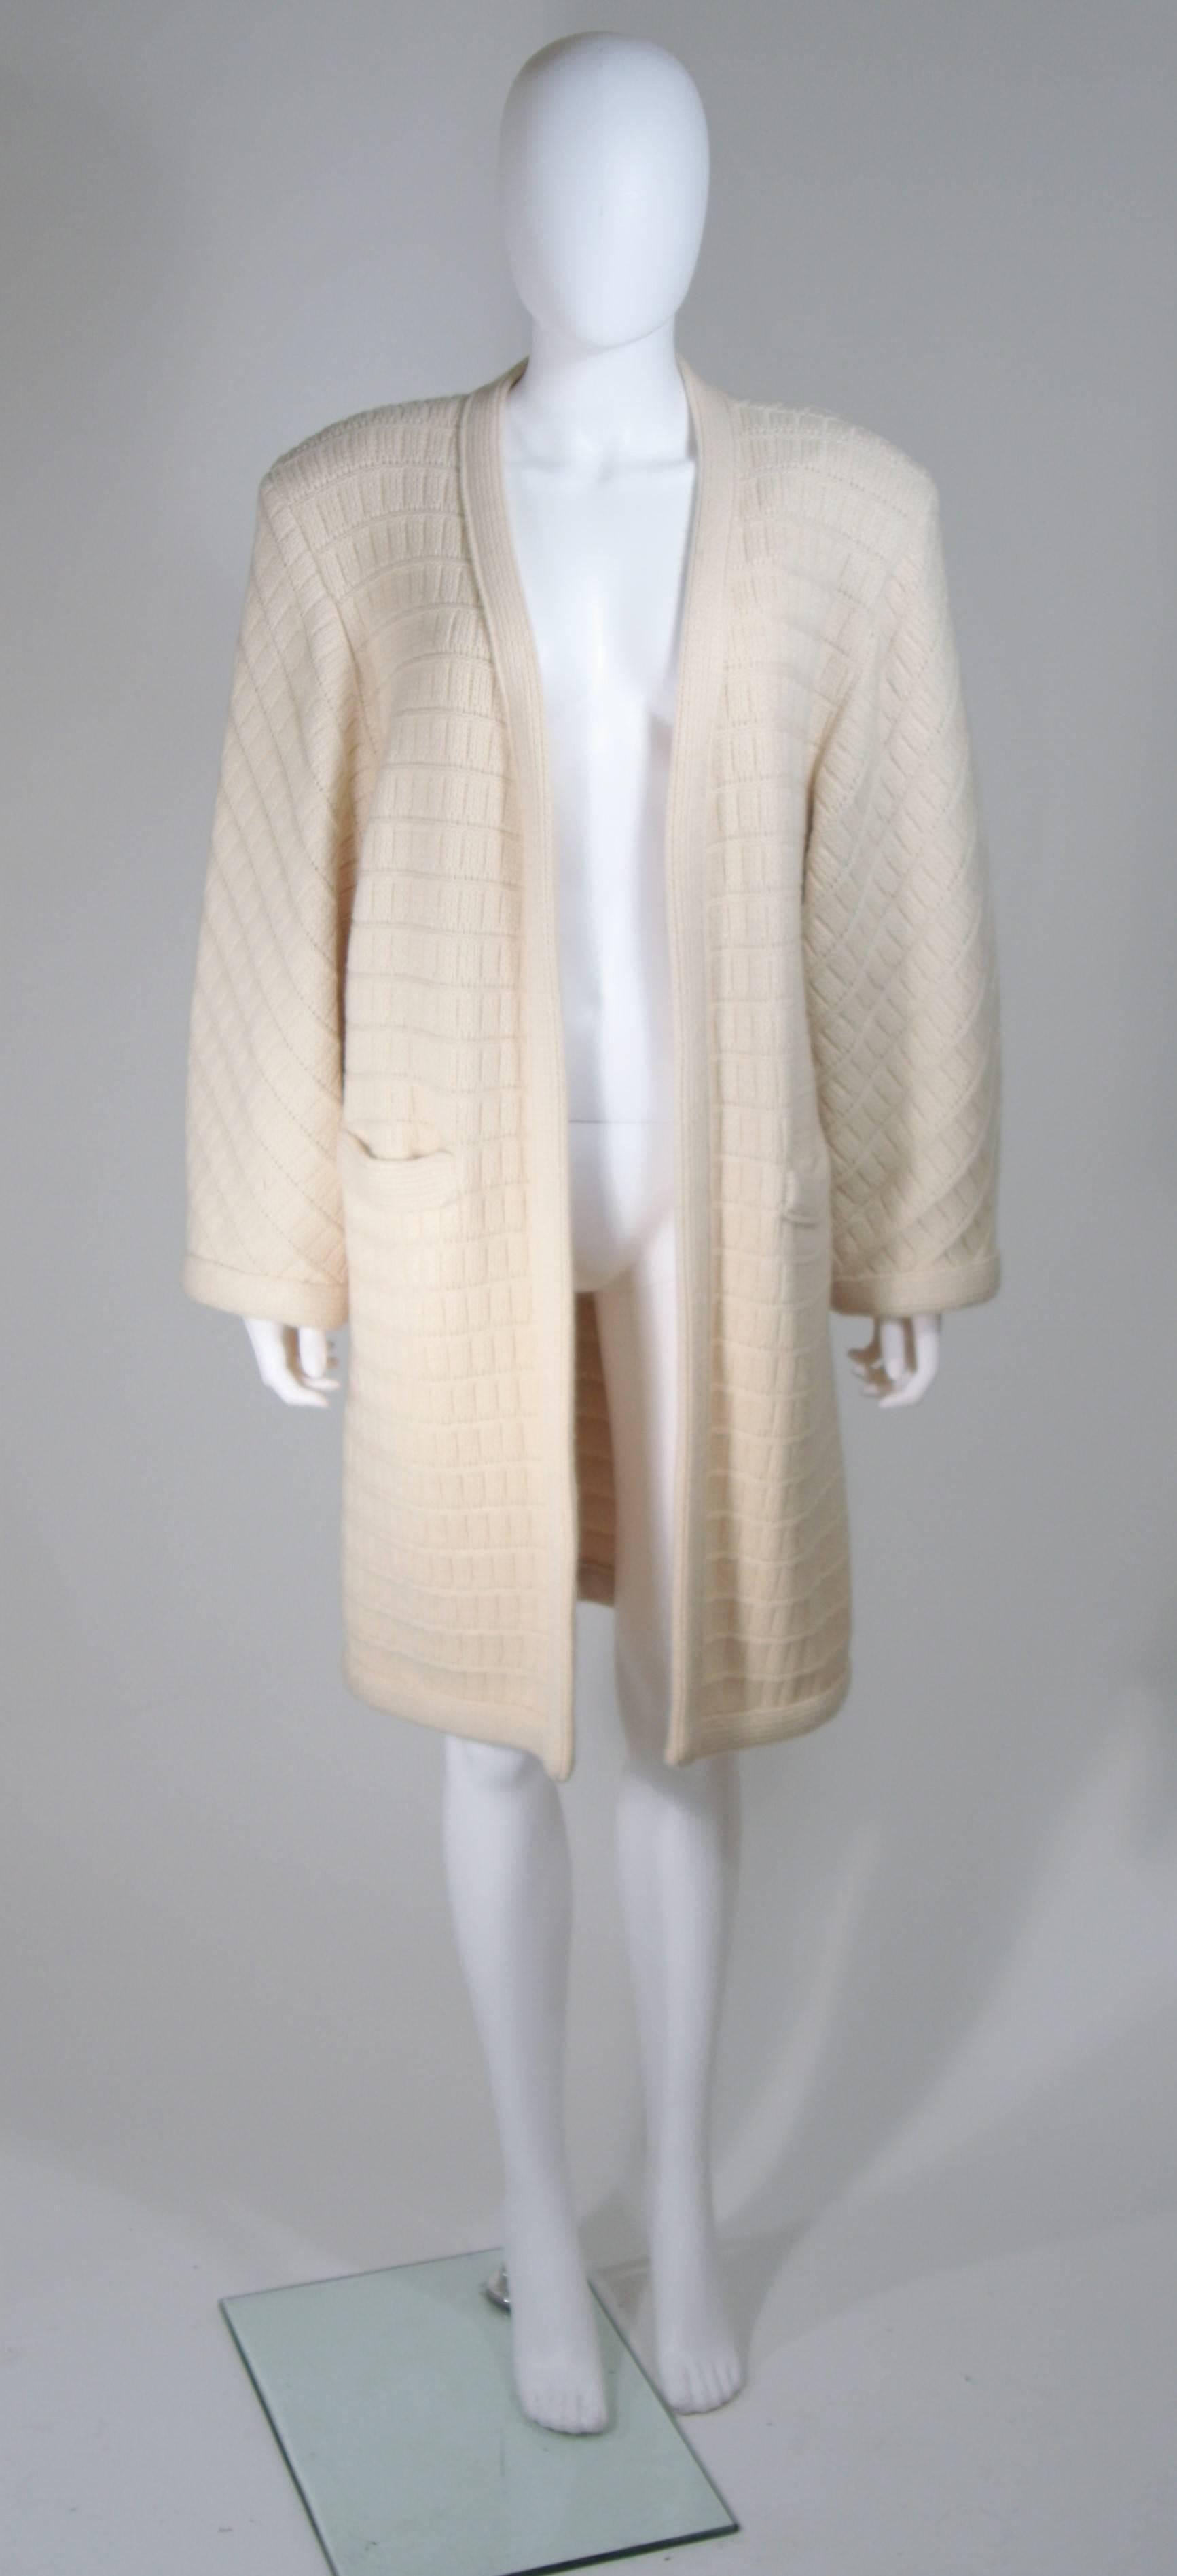   This Valentino  coat is composed of a cream knit cashmere. Features front pockets, shoulder pads (which can be easily removed) and an open style design. In excellent vintage condition. 

  **Please cross-reference measurements for personal